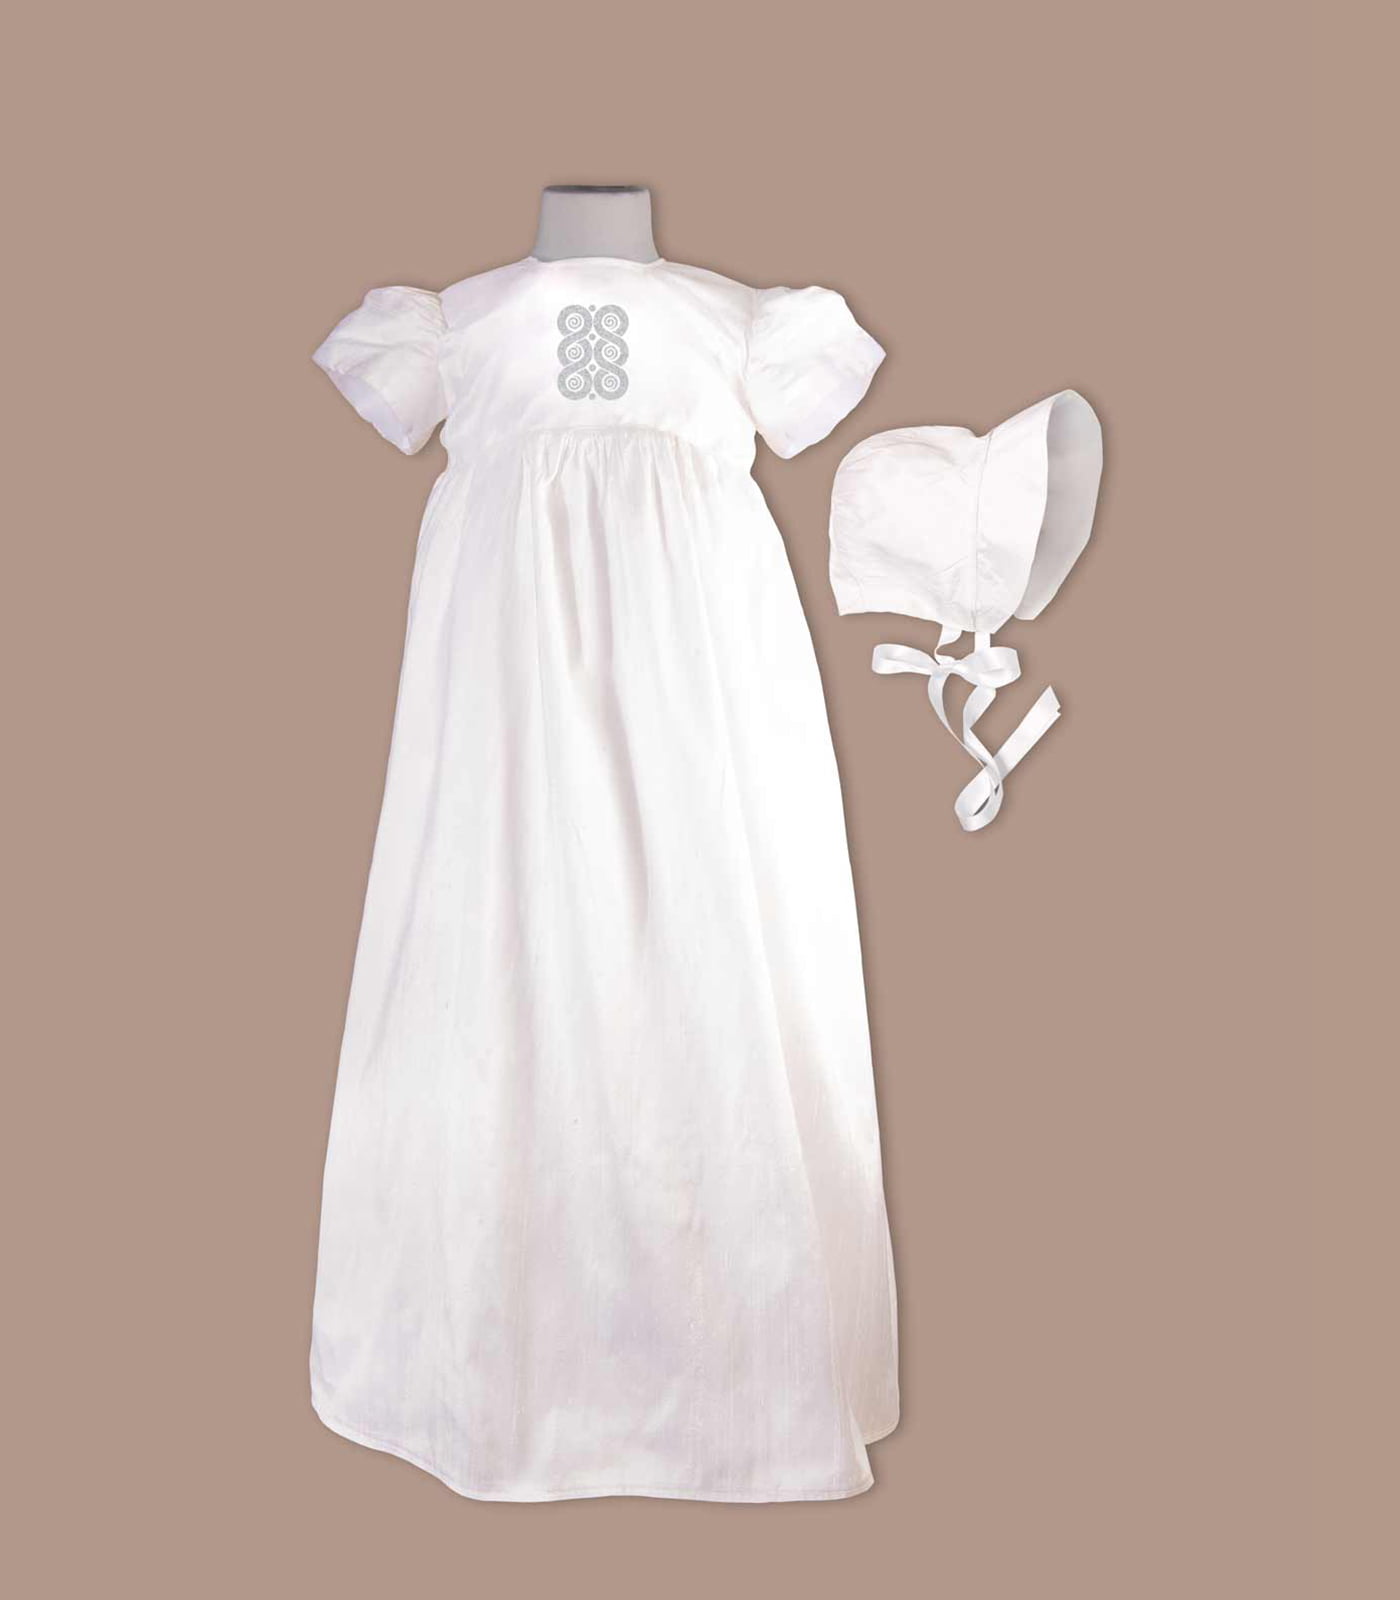 Roscommon Christening Gown with bonnet